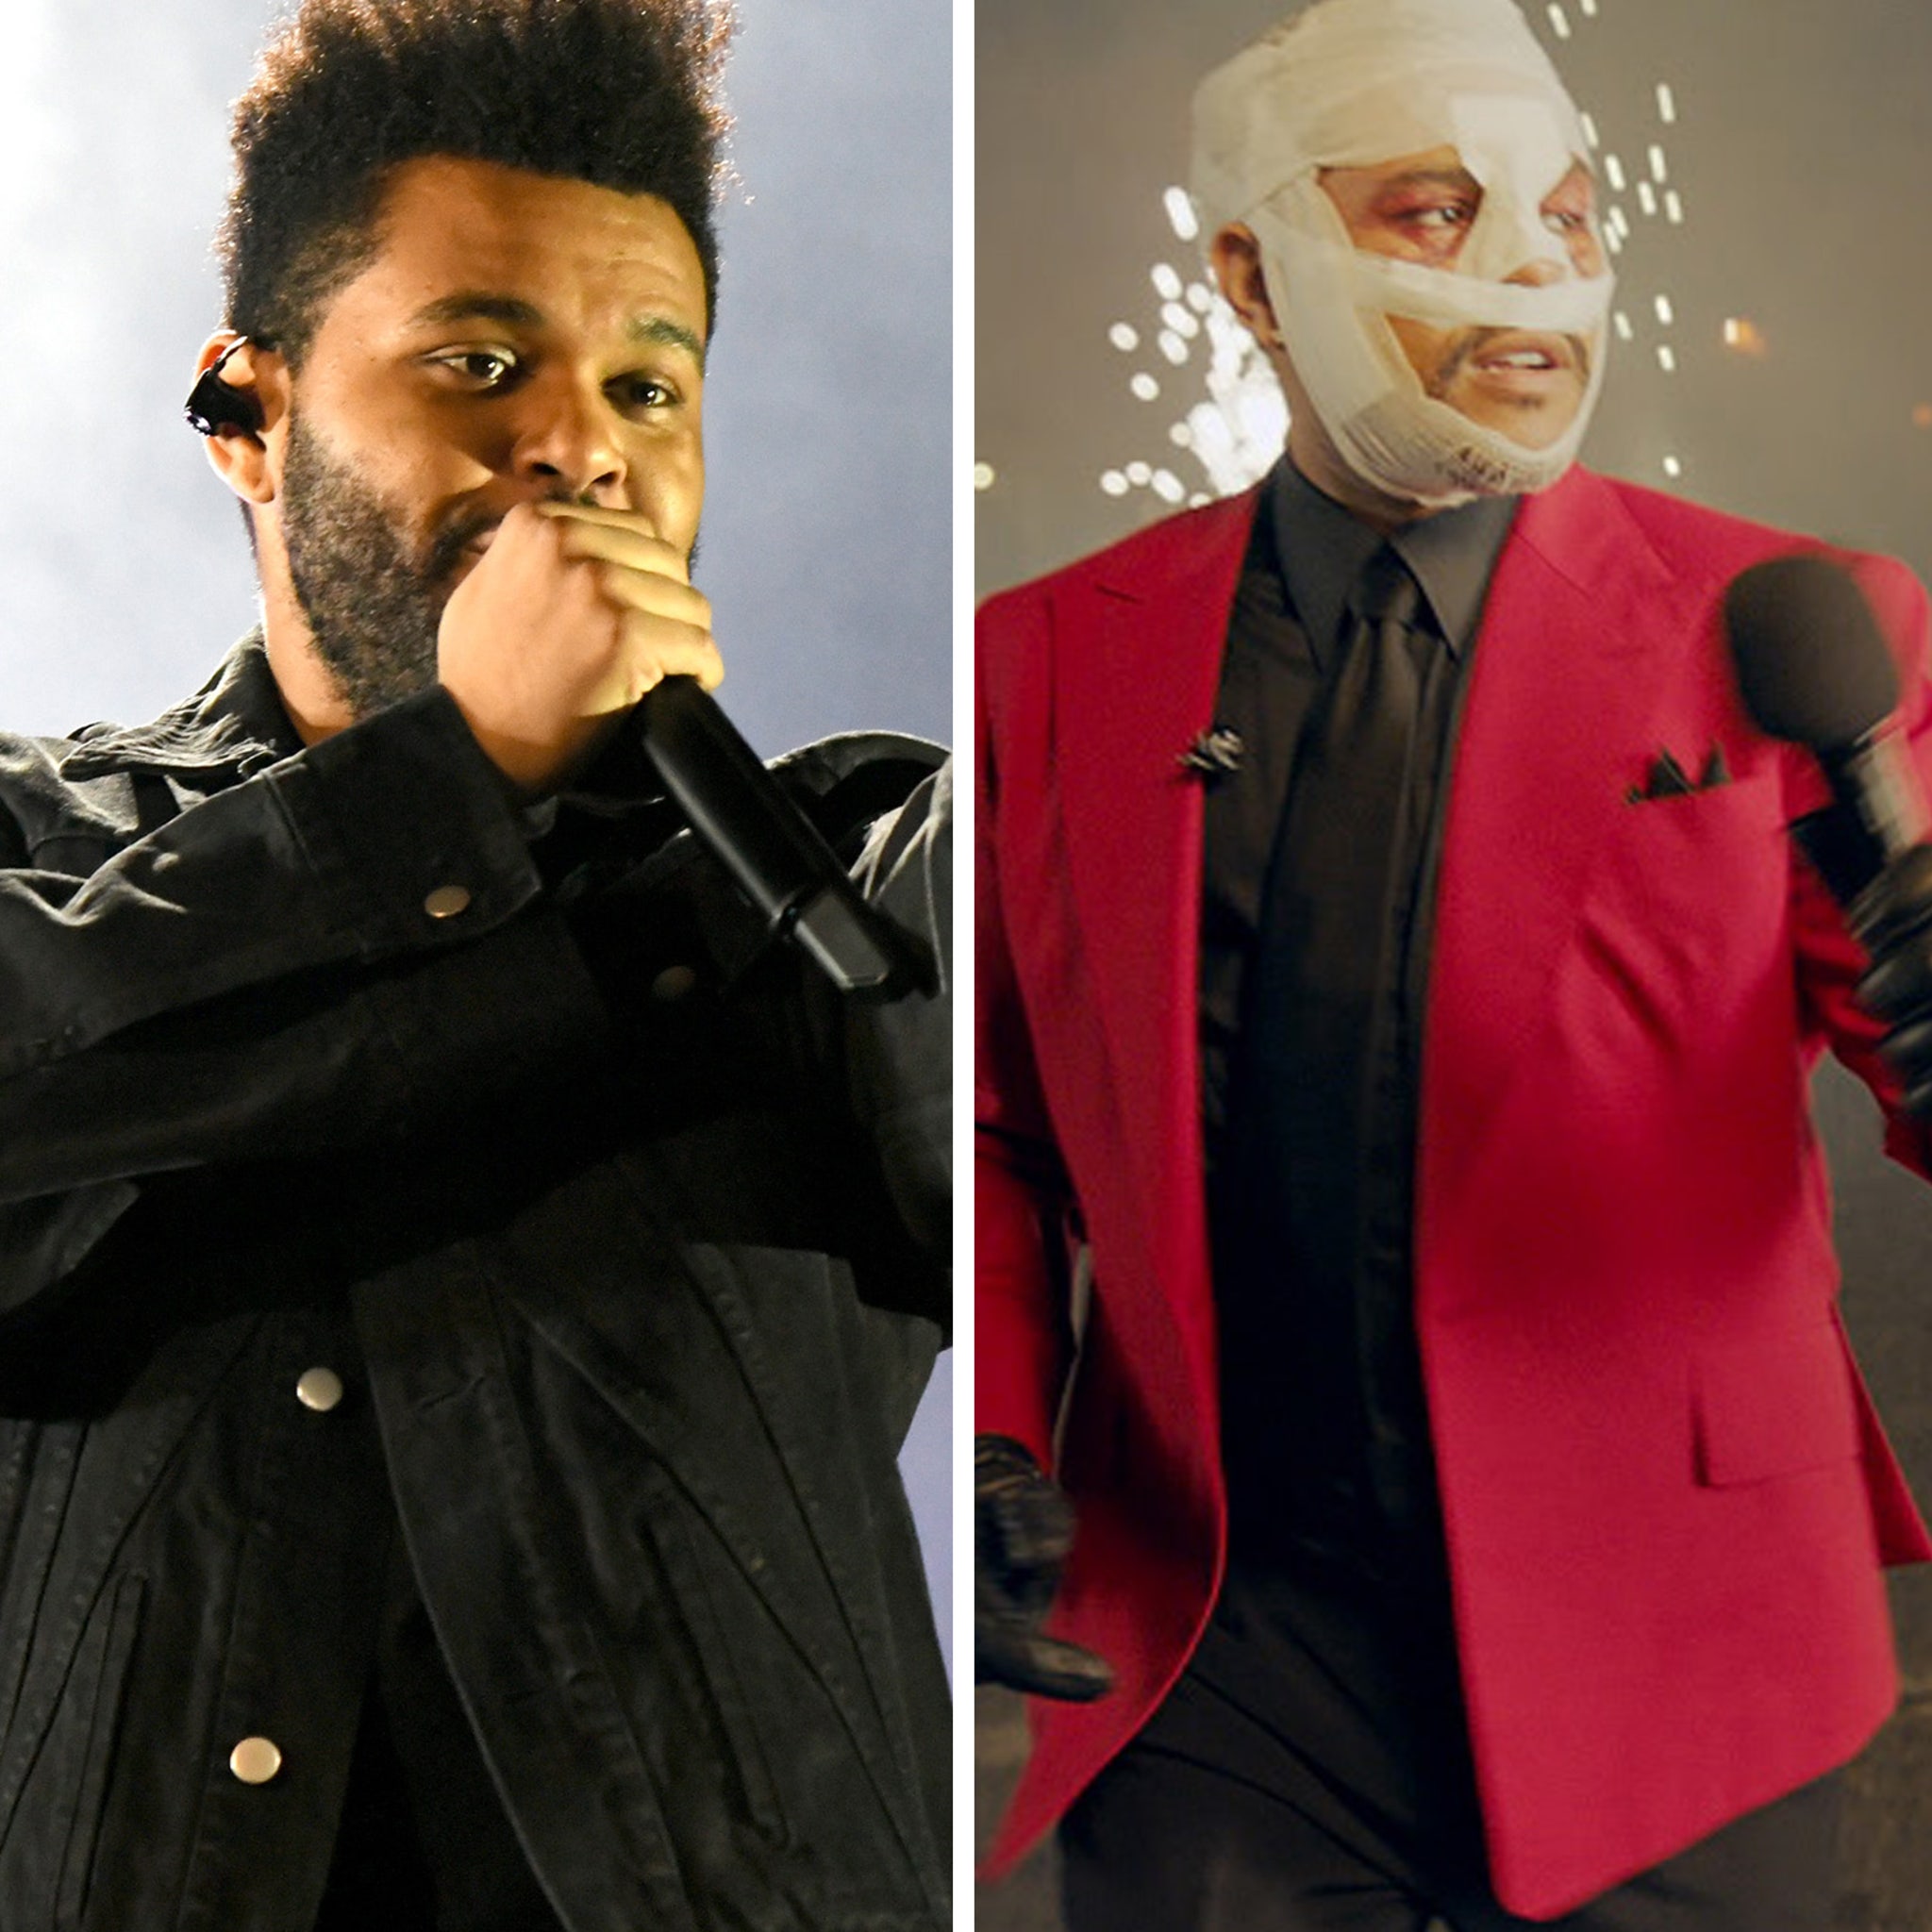 Super Bowl performer The Weeknd reveals why his dancers wore face bandages